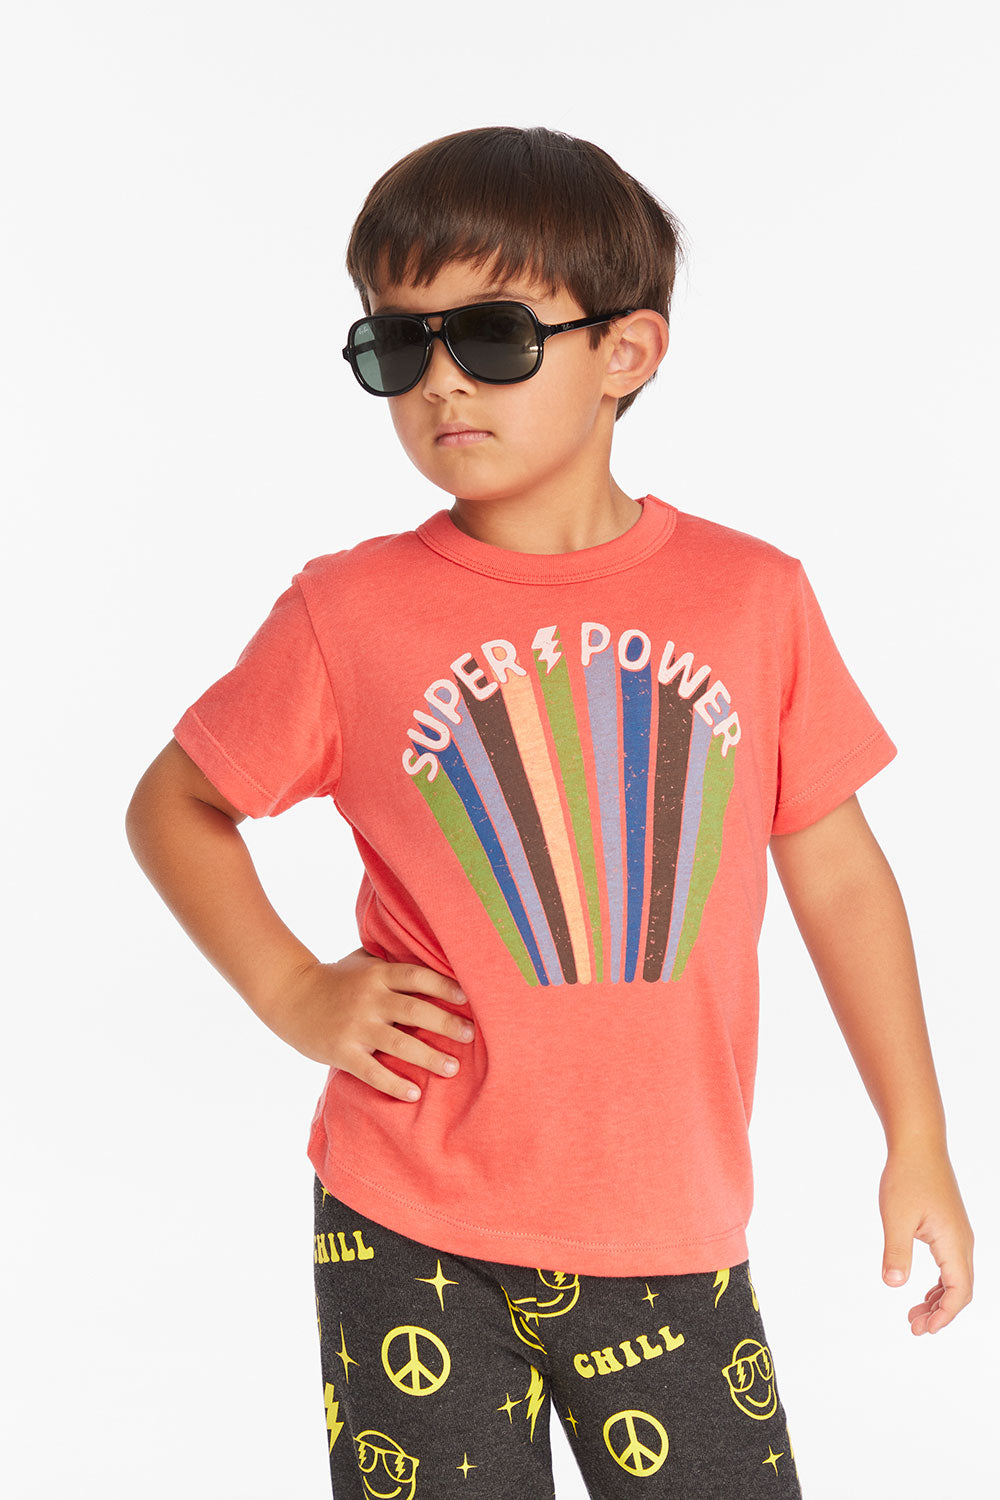 Superpower Boys Tee Boys chaserbrand